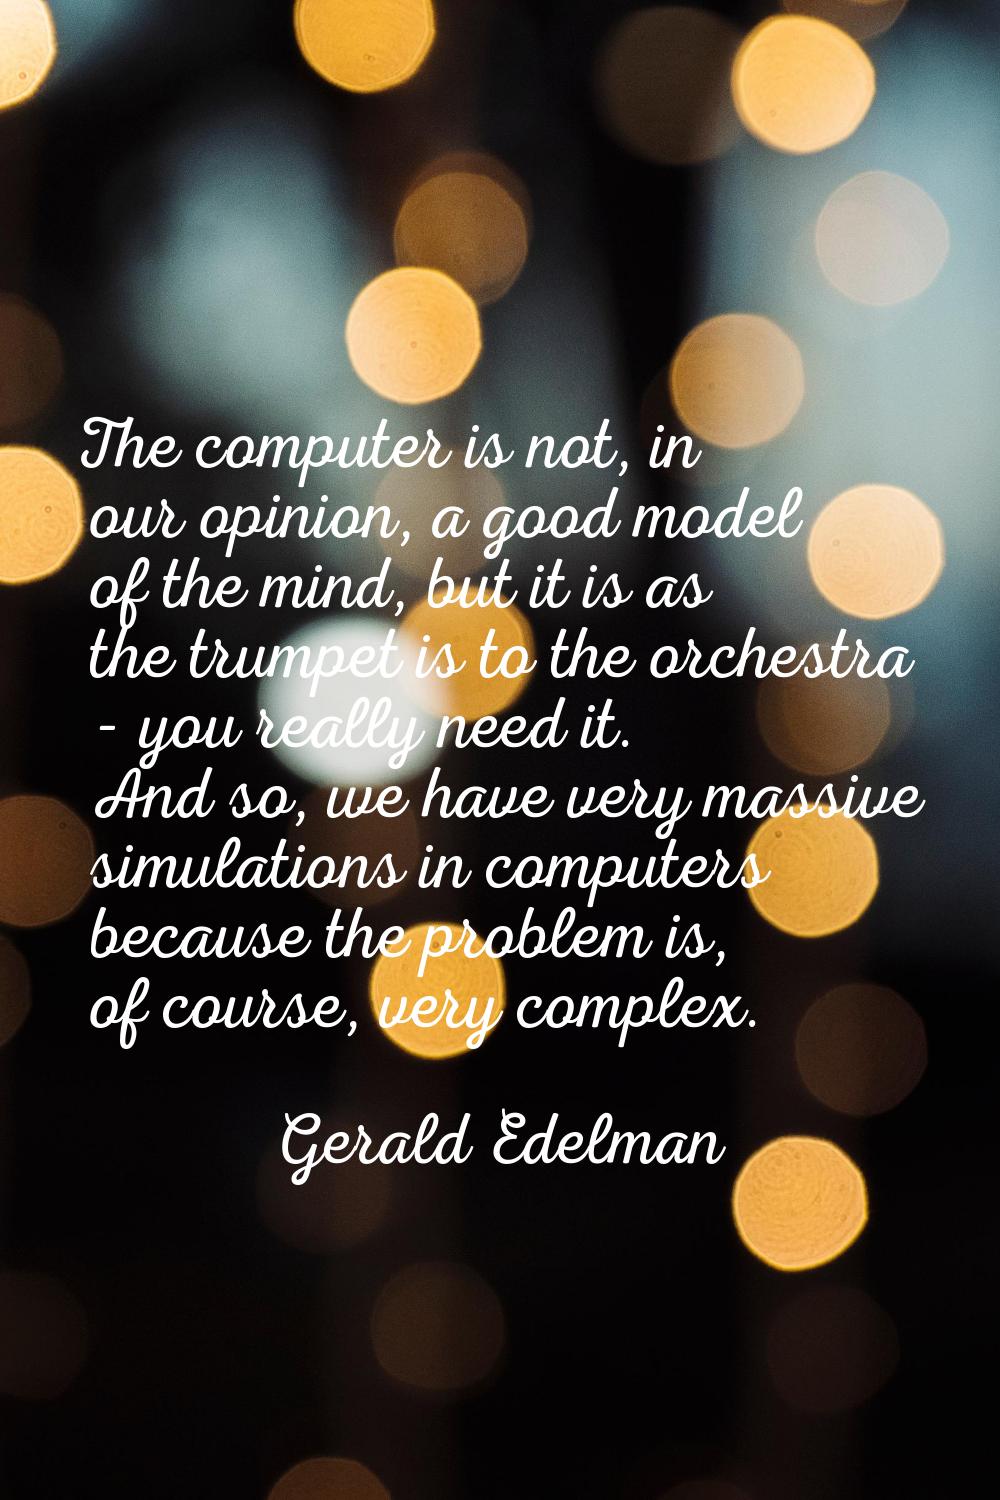 The computer is not, in our opinion, a good model of the mind, but it is as the trumpet is to the o